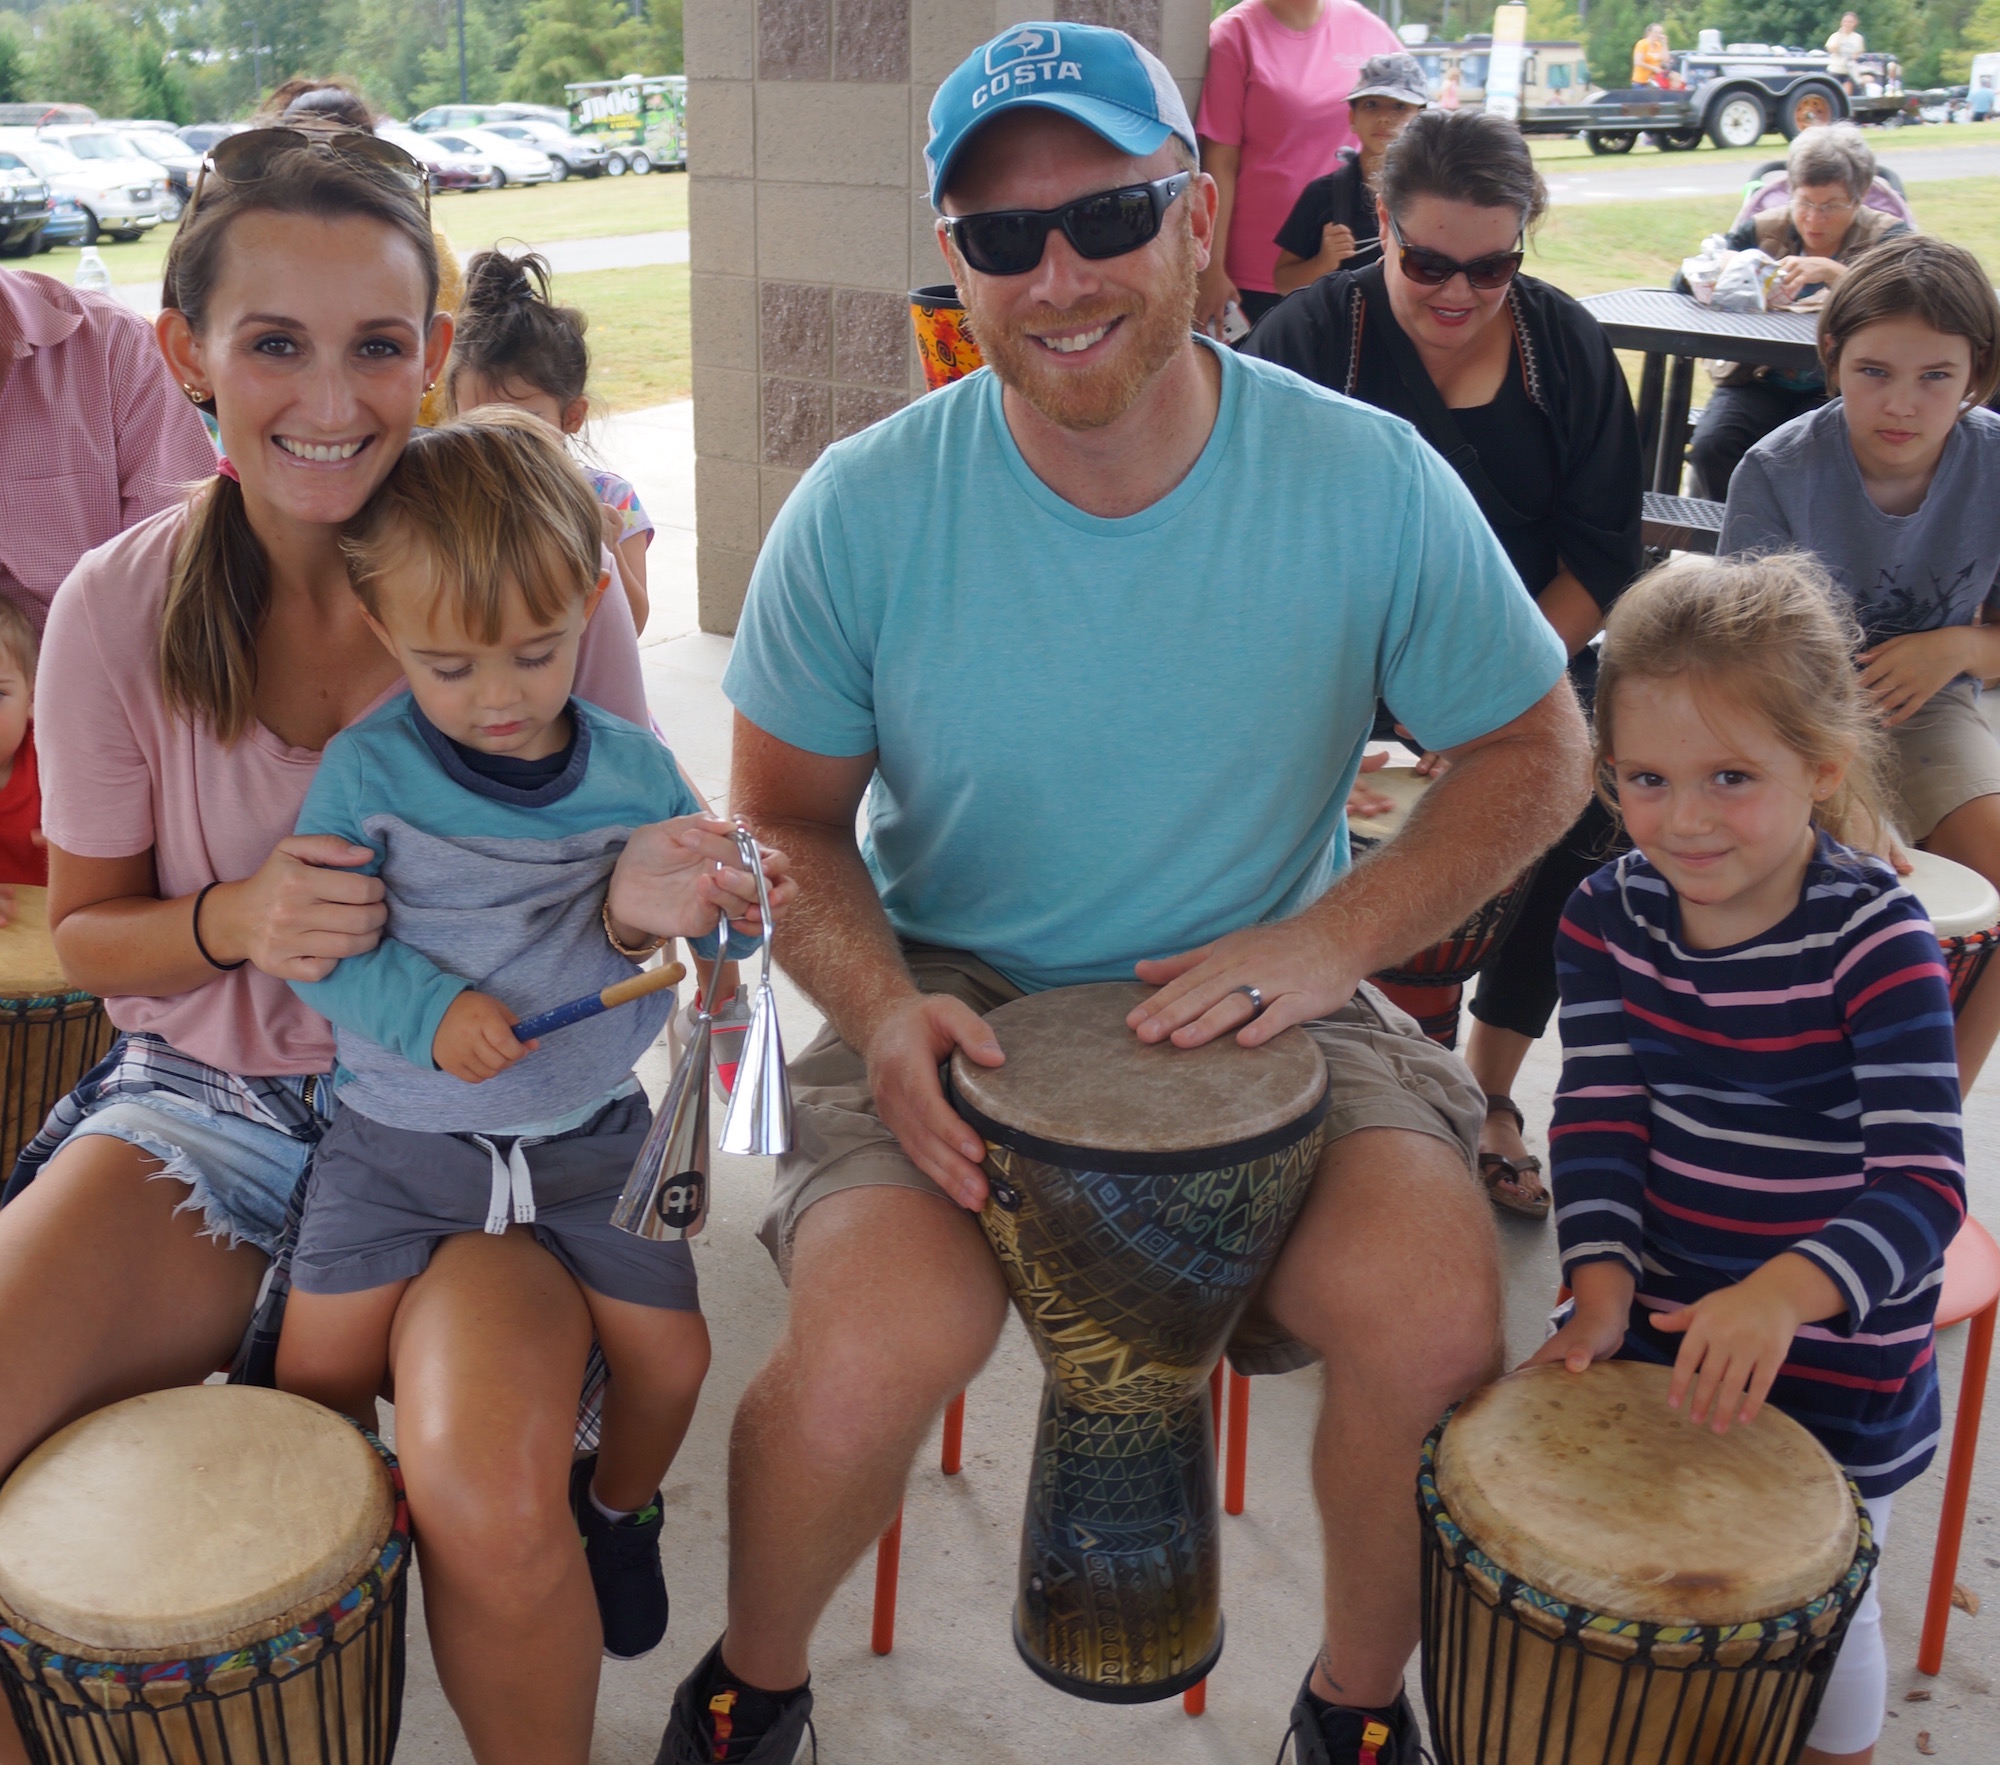 Beatin' Path brings the Fam Jam to a birthday party in the park for an extra-special celebration.